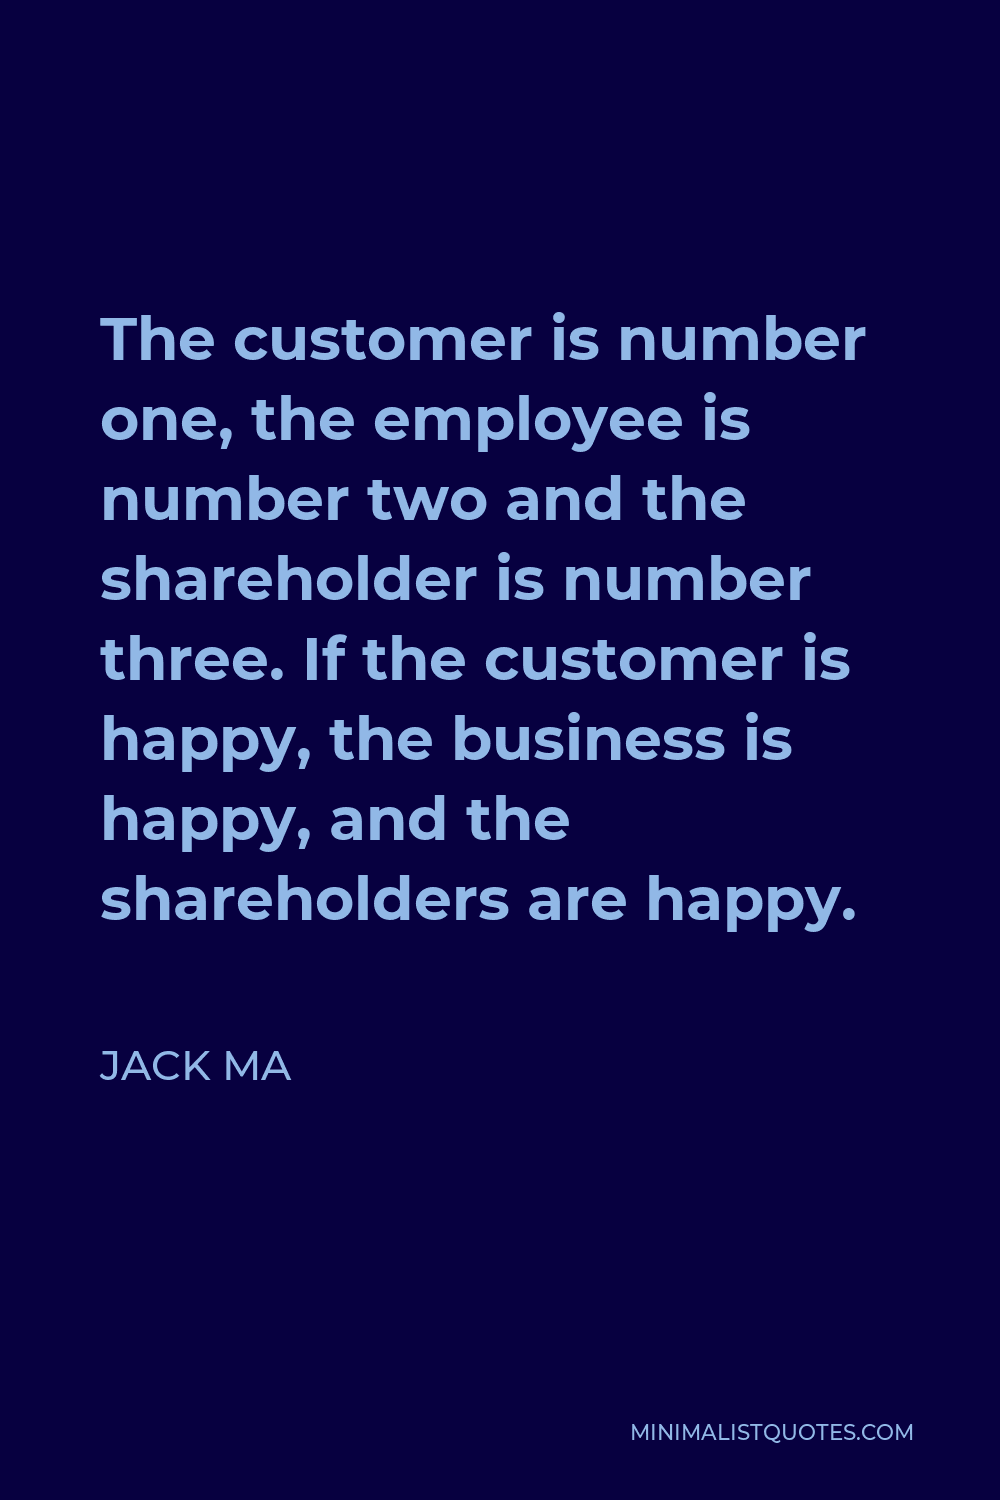 Jack Ma Quote - The customer is number one, the employee is number two and the shareholder is number three. If the customer is happy, the business is happy, and the shareholders are happy.